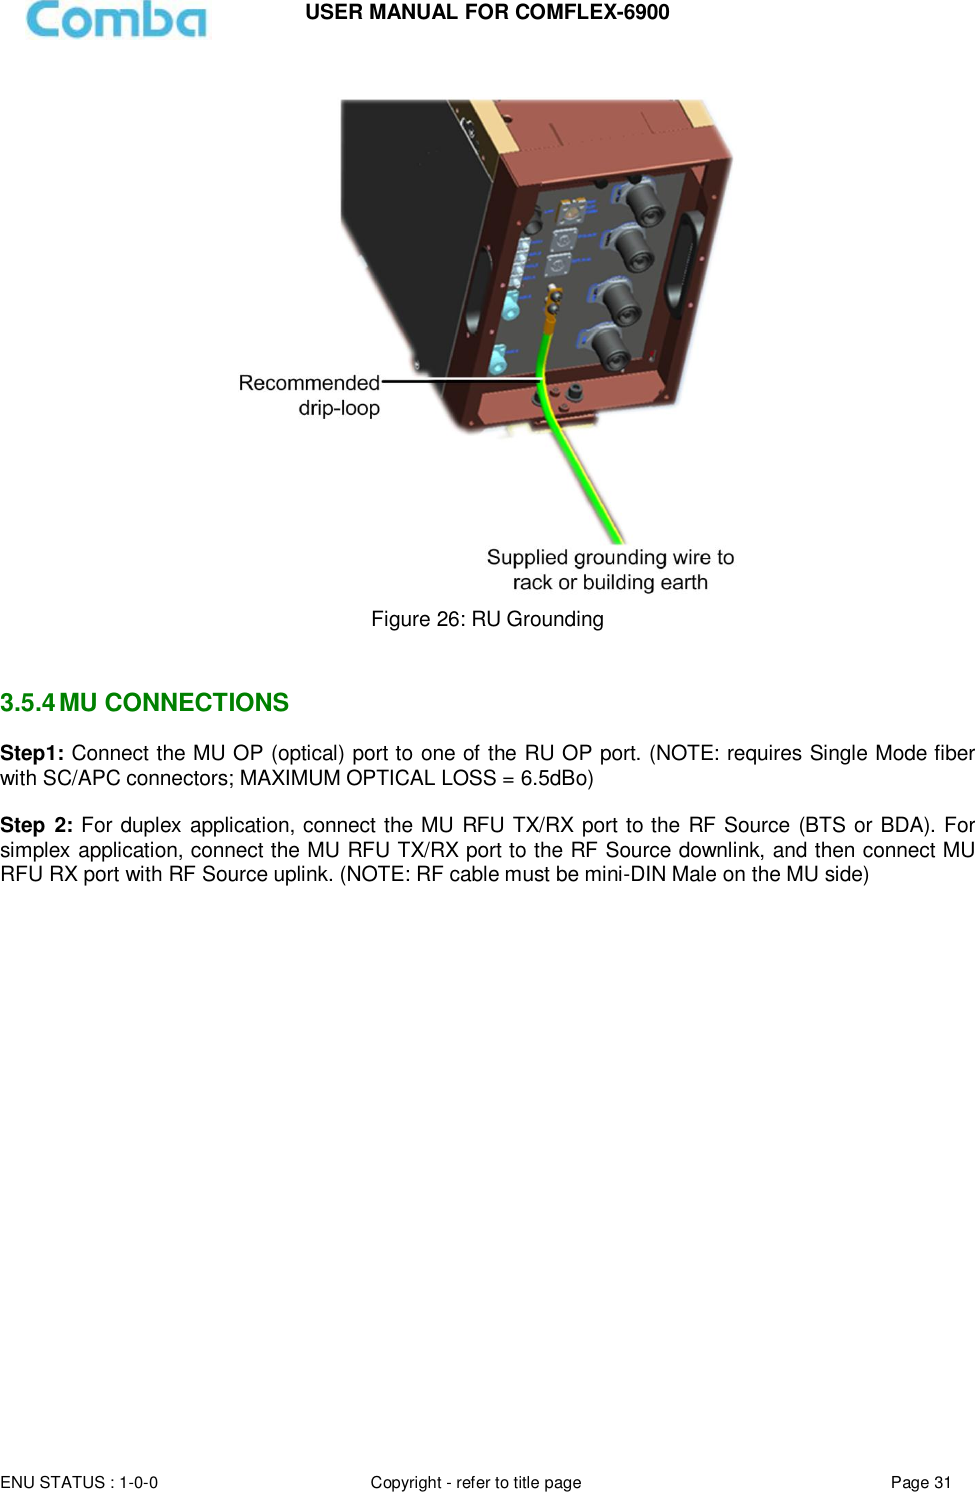 Page 31 of Comba Telecom COMFLEX-6900 ComFlex Series Distributed Antenna System User Manual 